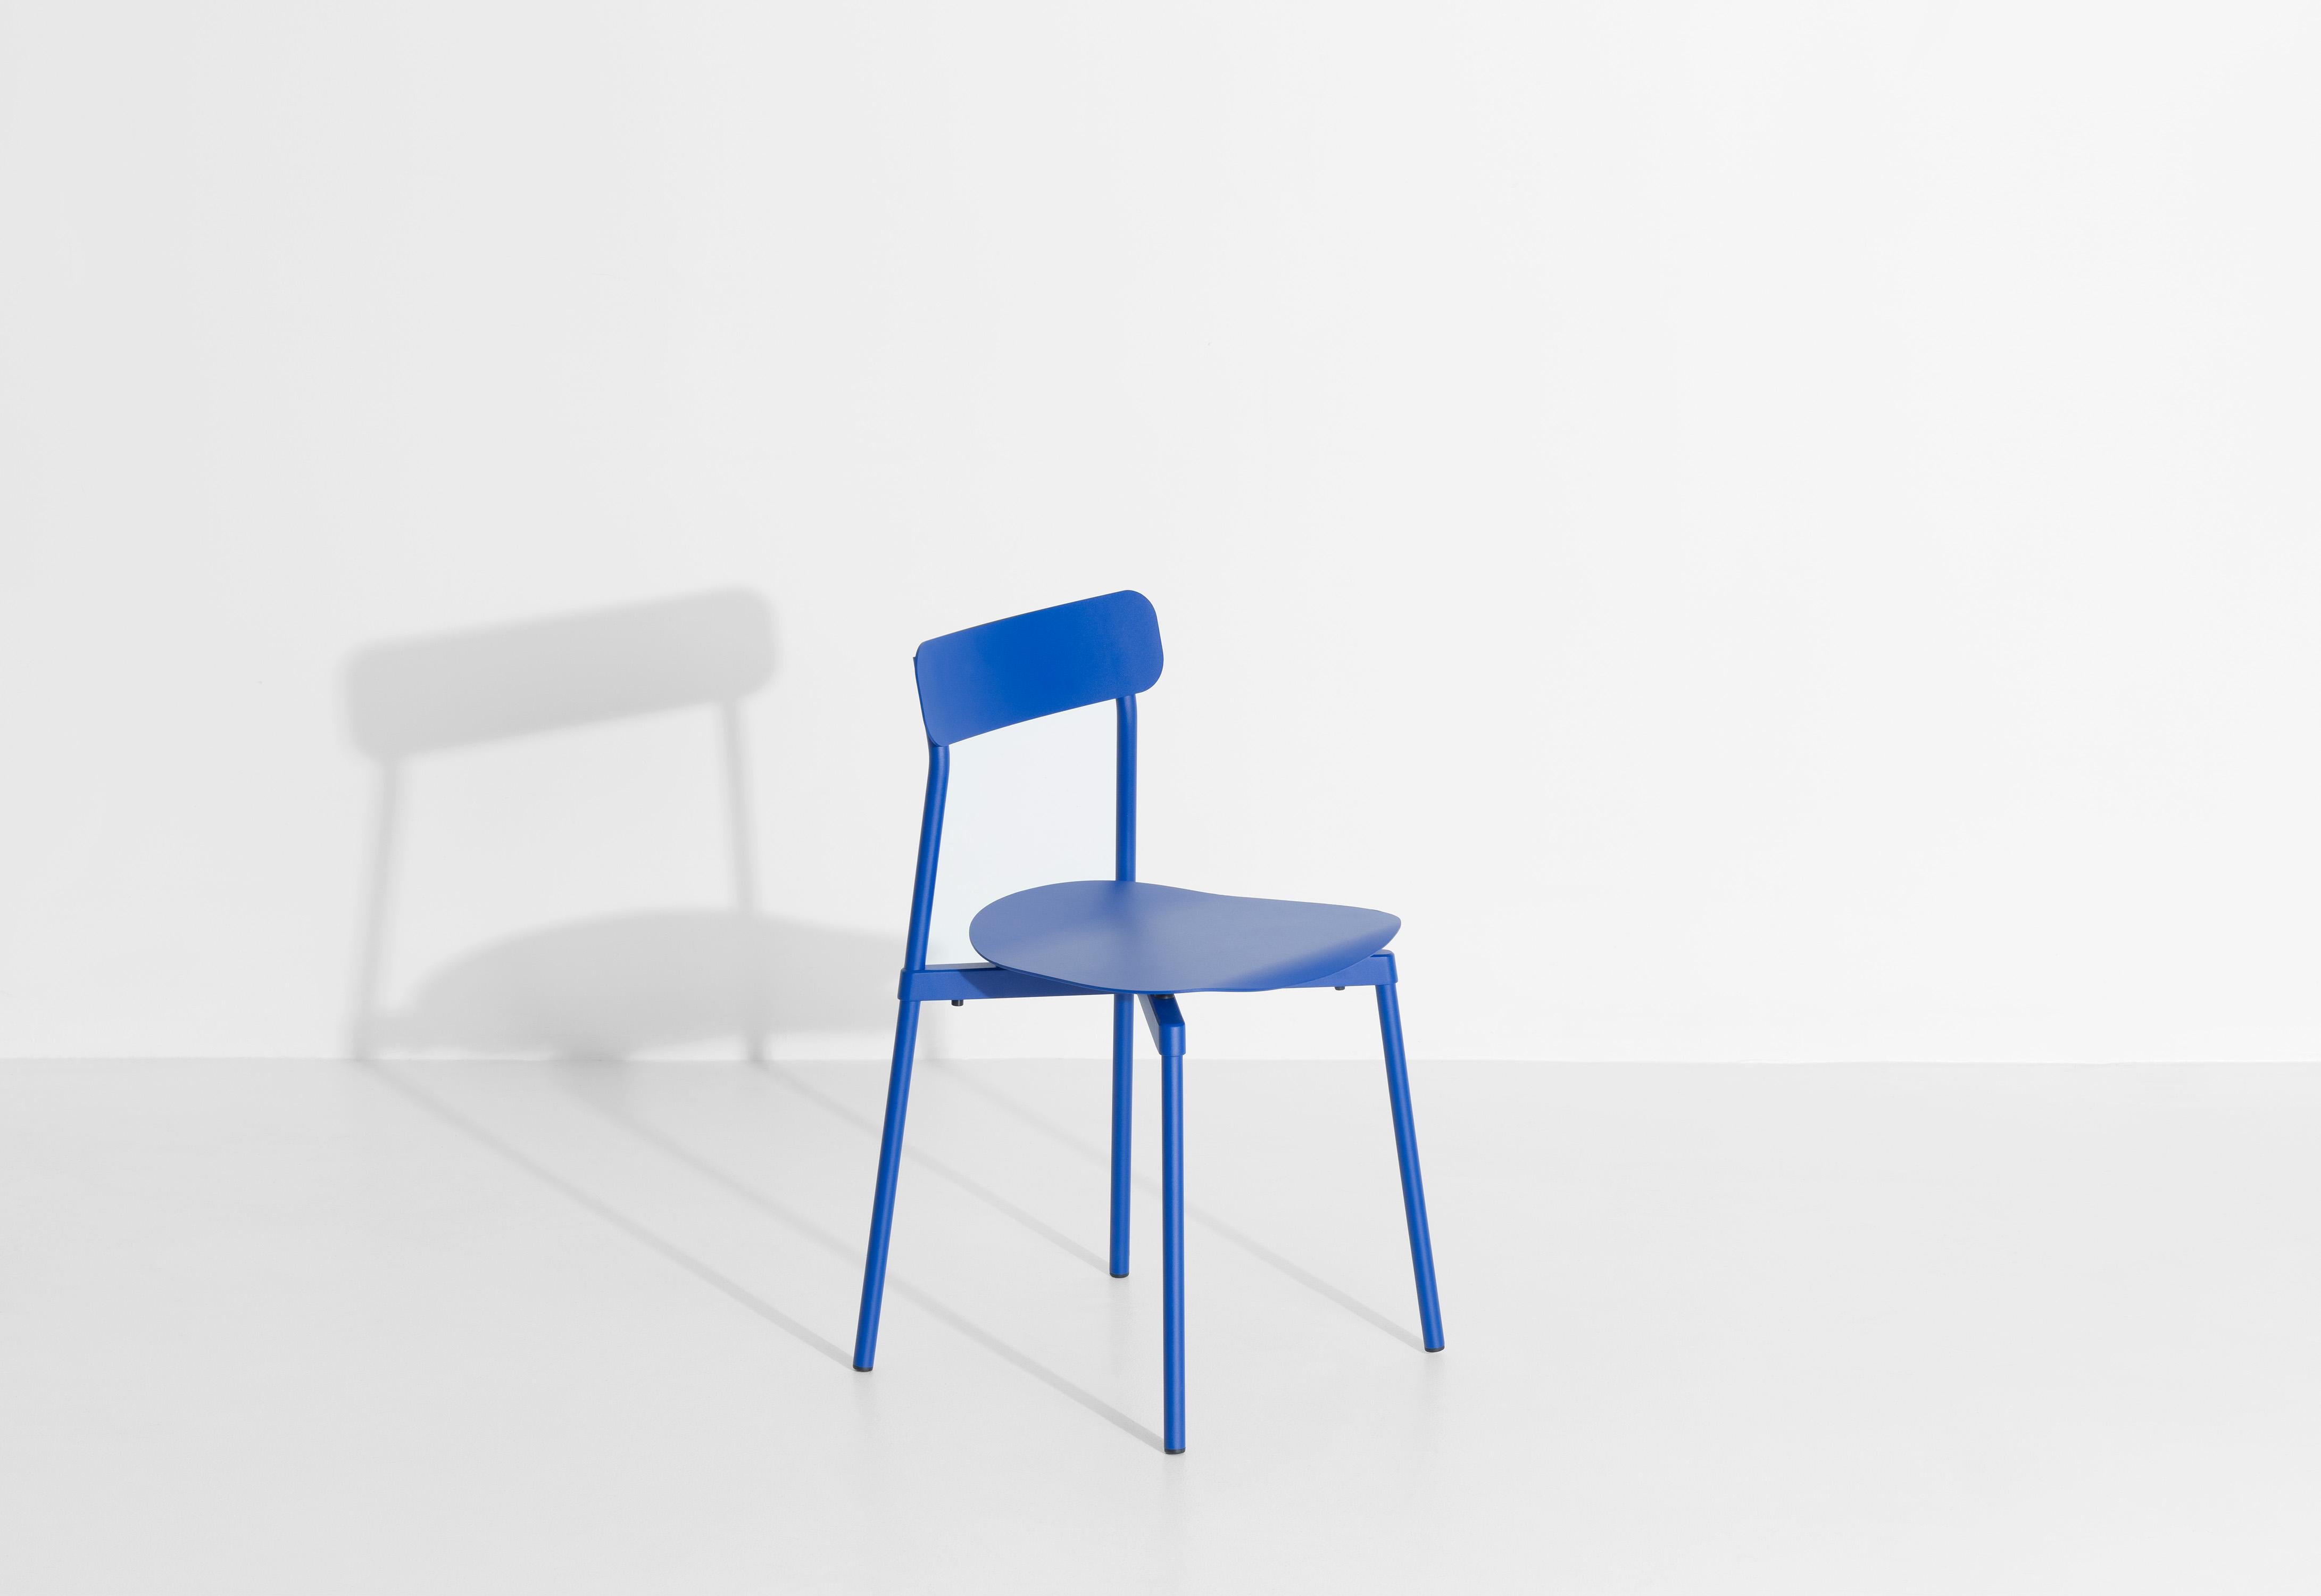 Contemporary Petite Friture Fromme Chair in Blue Aluminium by Tom Chung, 2019 For Sale